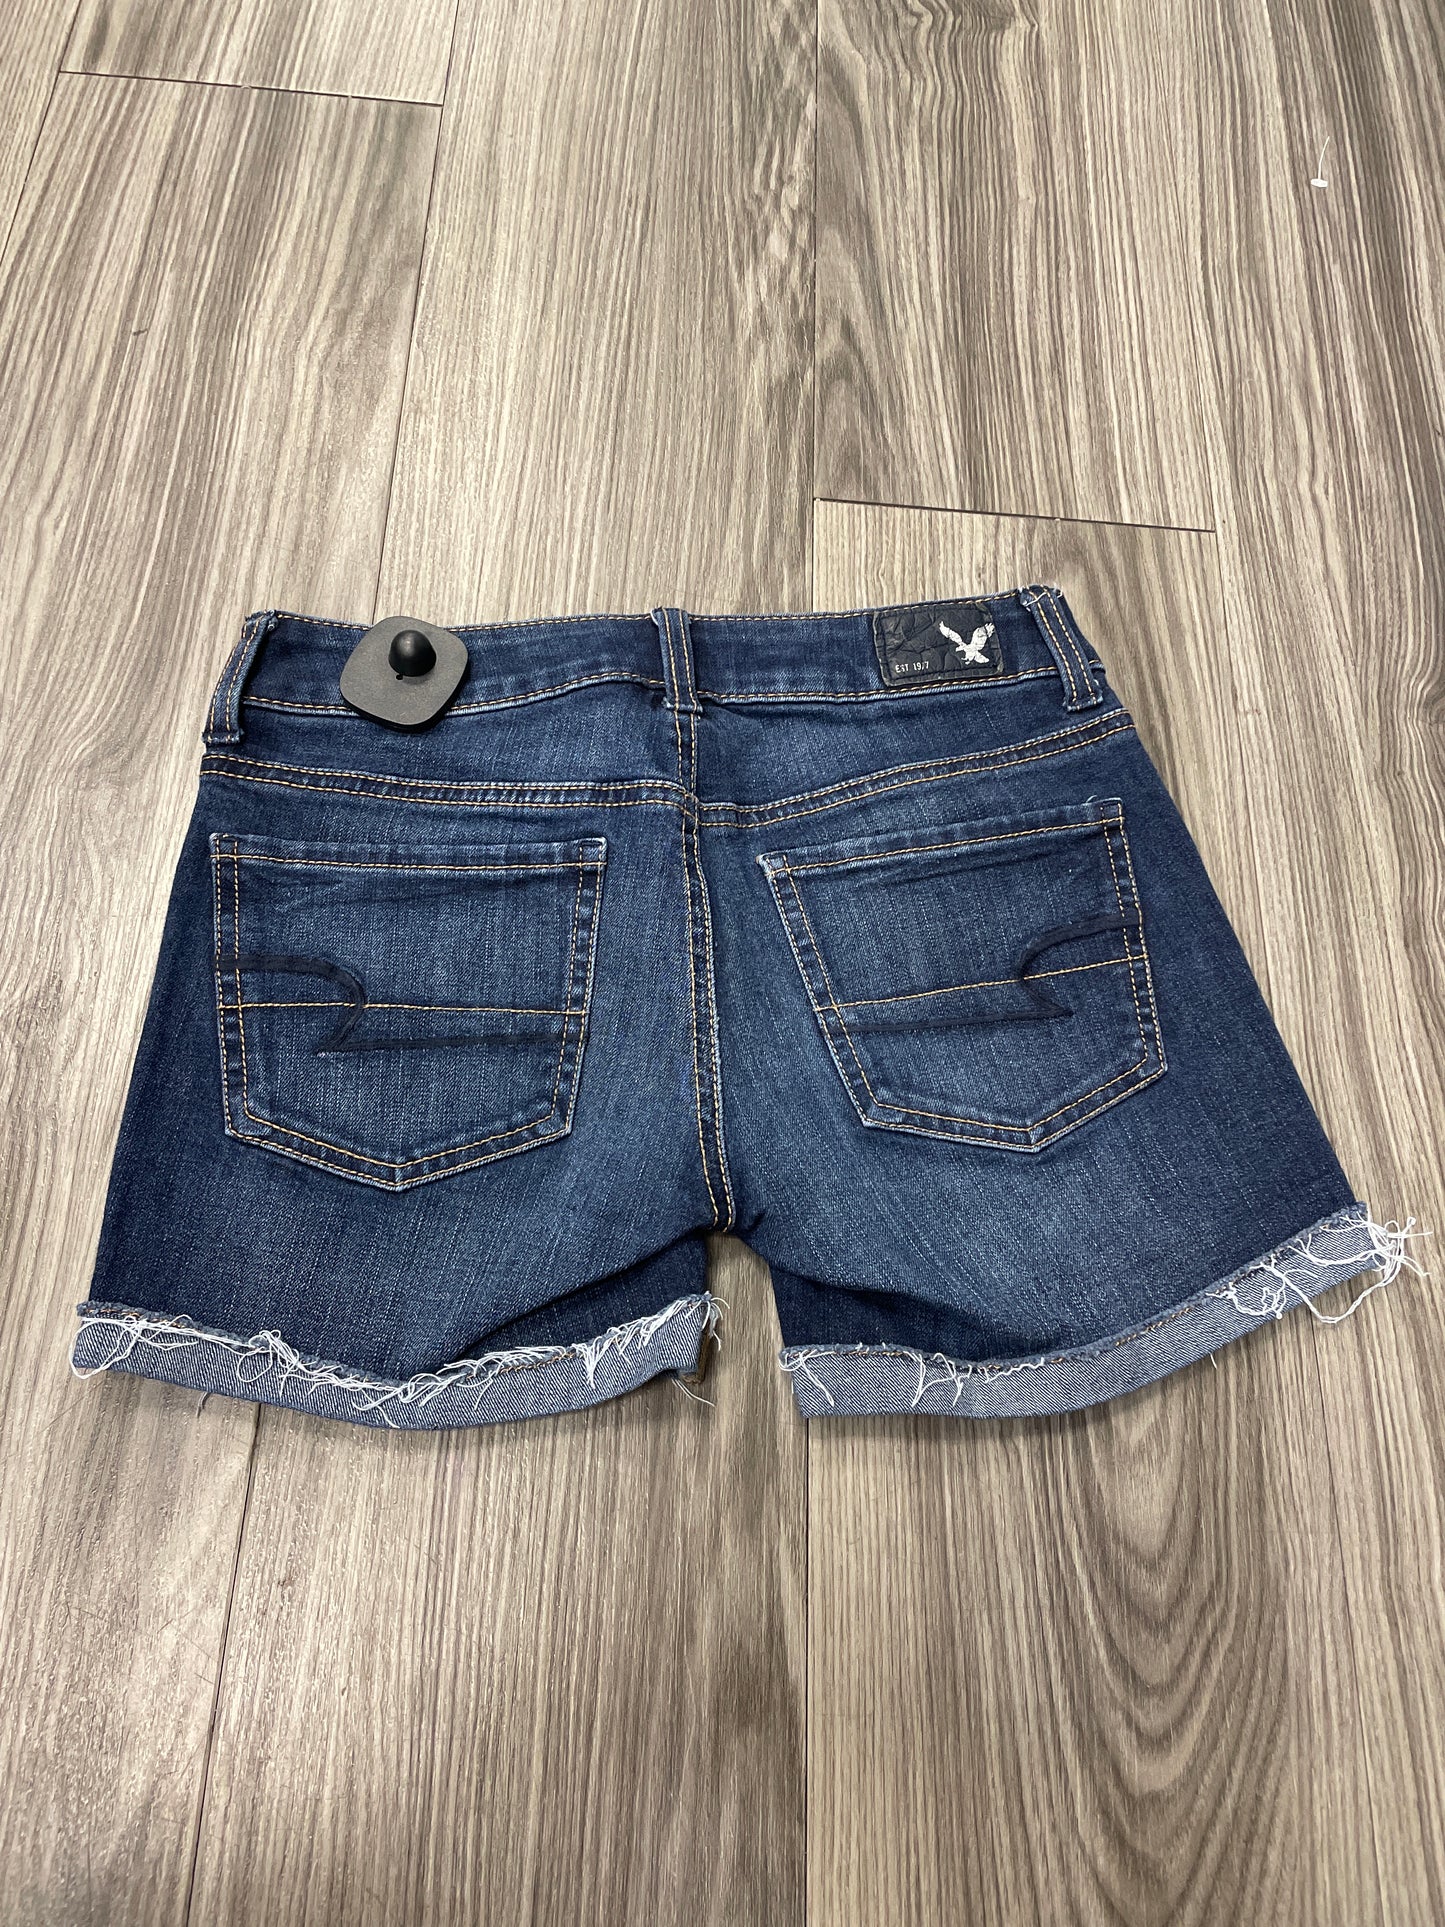 Shorts By American Eagle  Size: 00